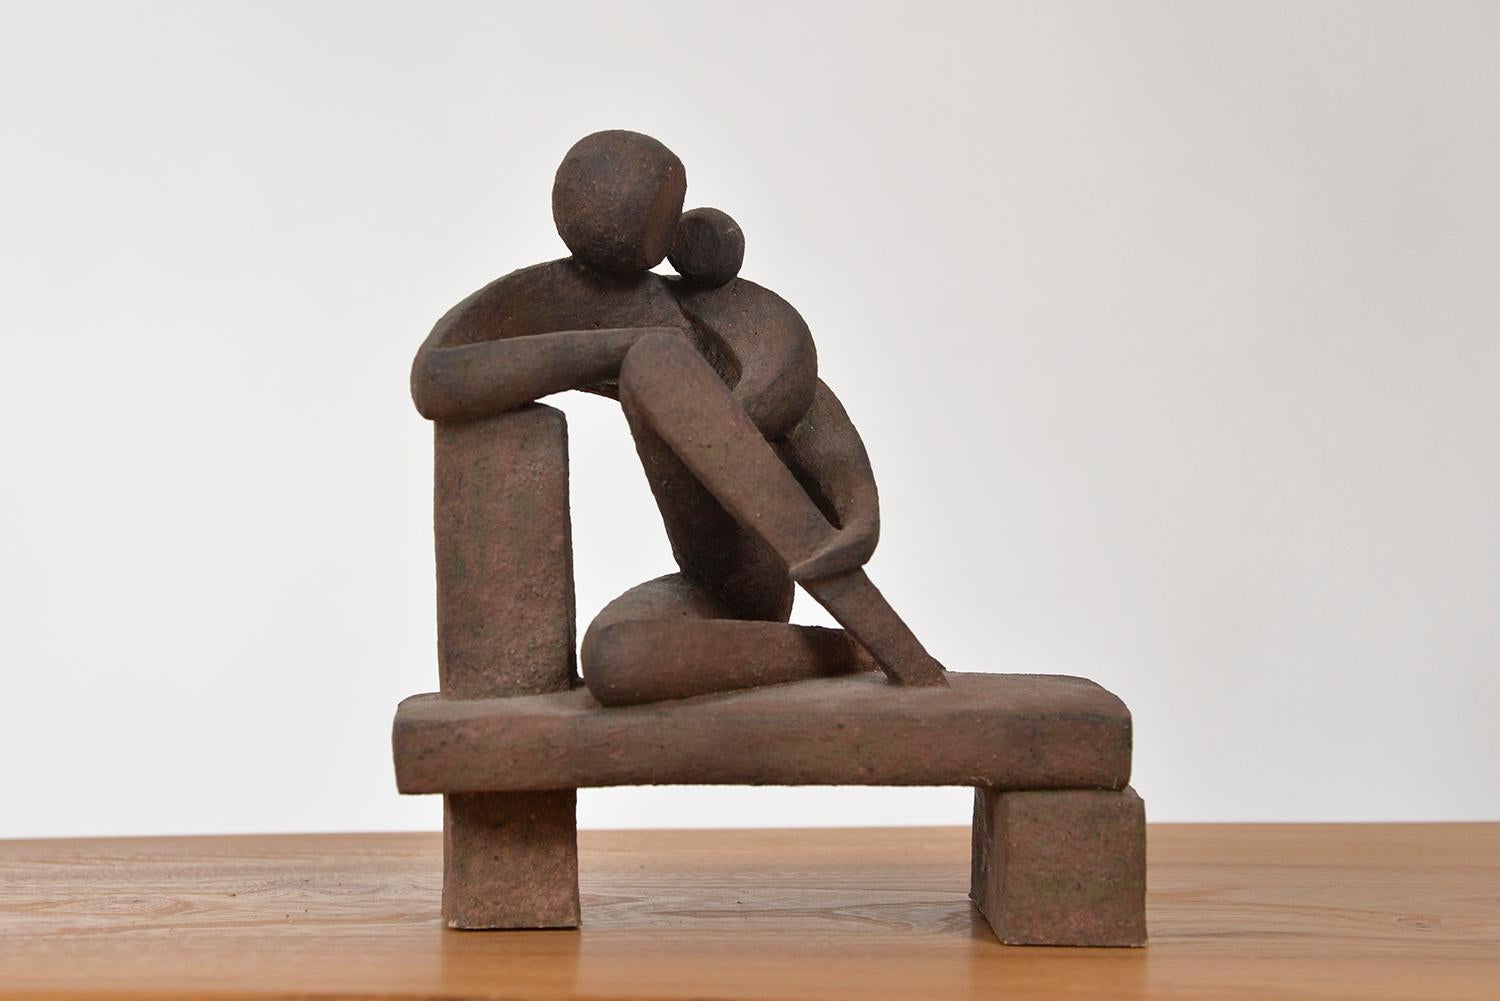 A very beautiful 1960s abstract pottery sculpture of a mother and child seated on a plinth. There is a wonderful contrast between the soft sweeping curves of the figures that intertwine with one another, and the hard angular seat they are sat upon.